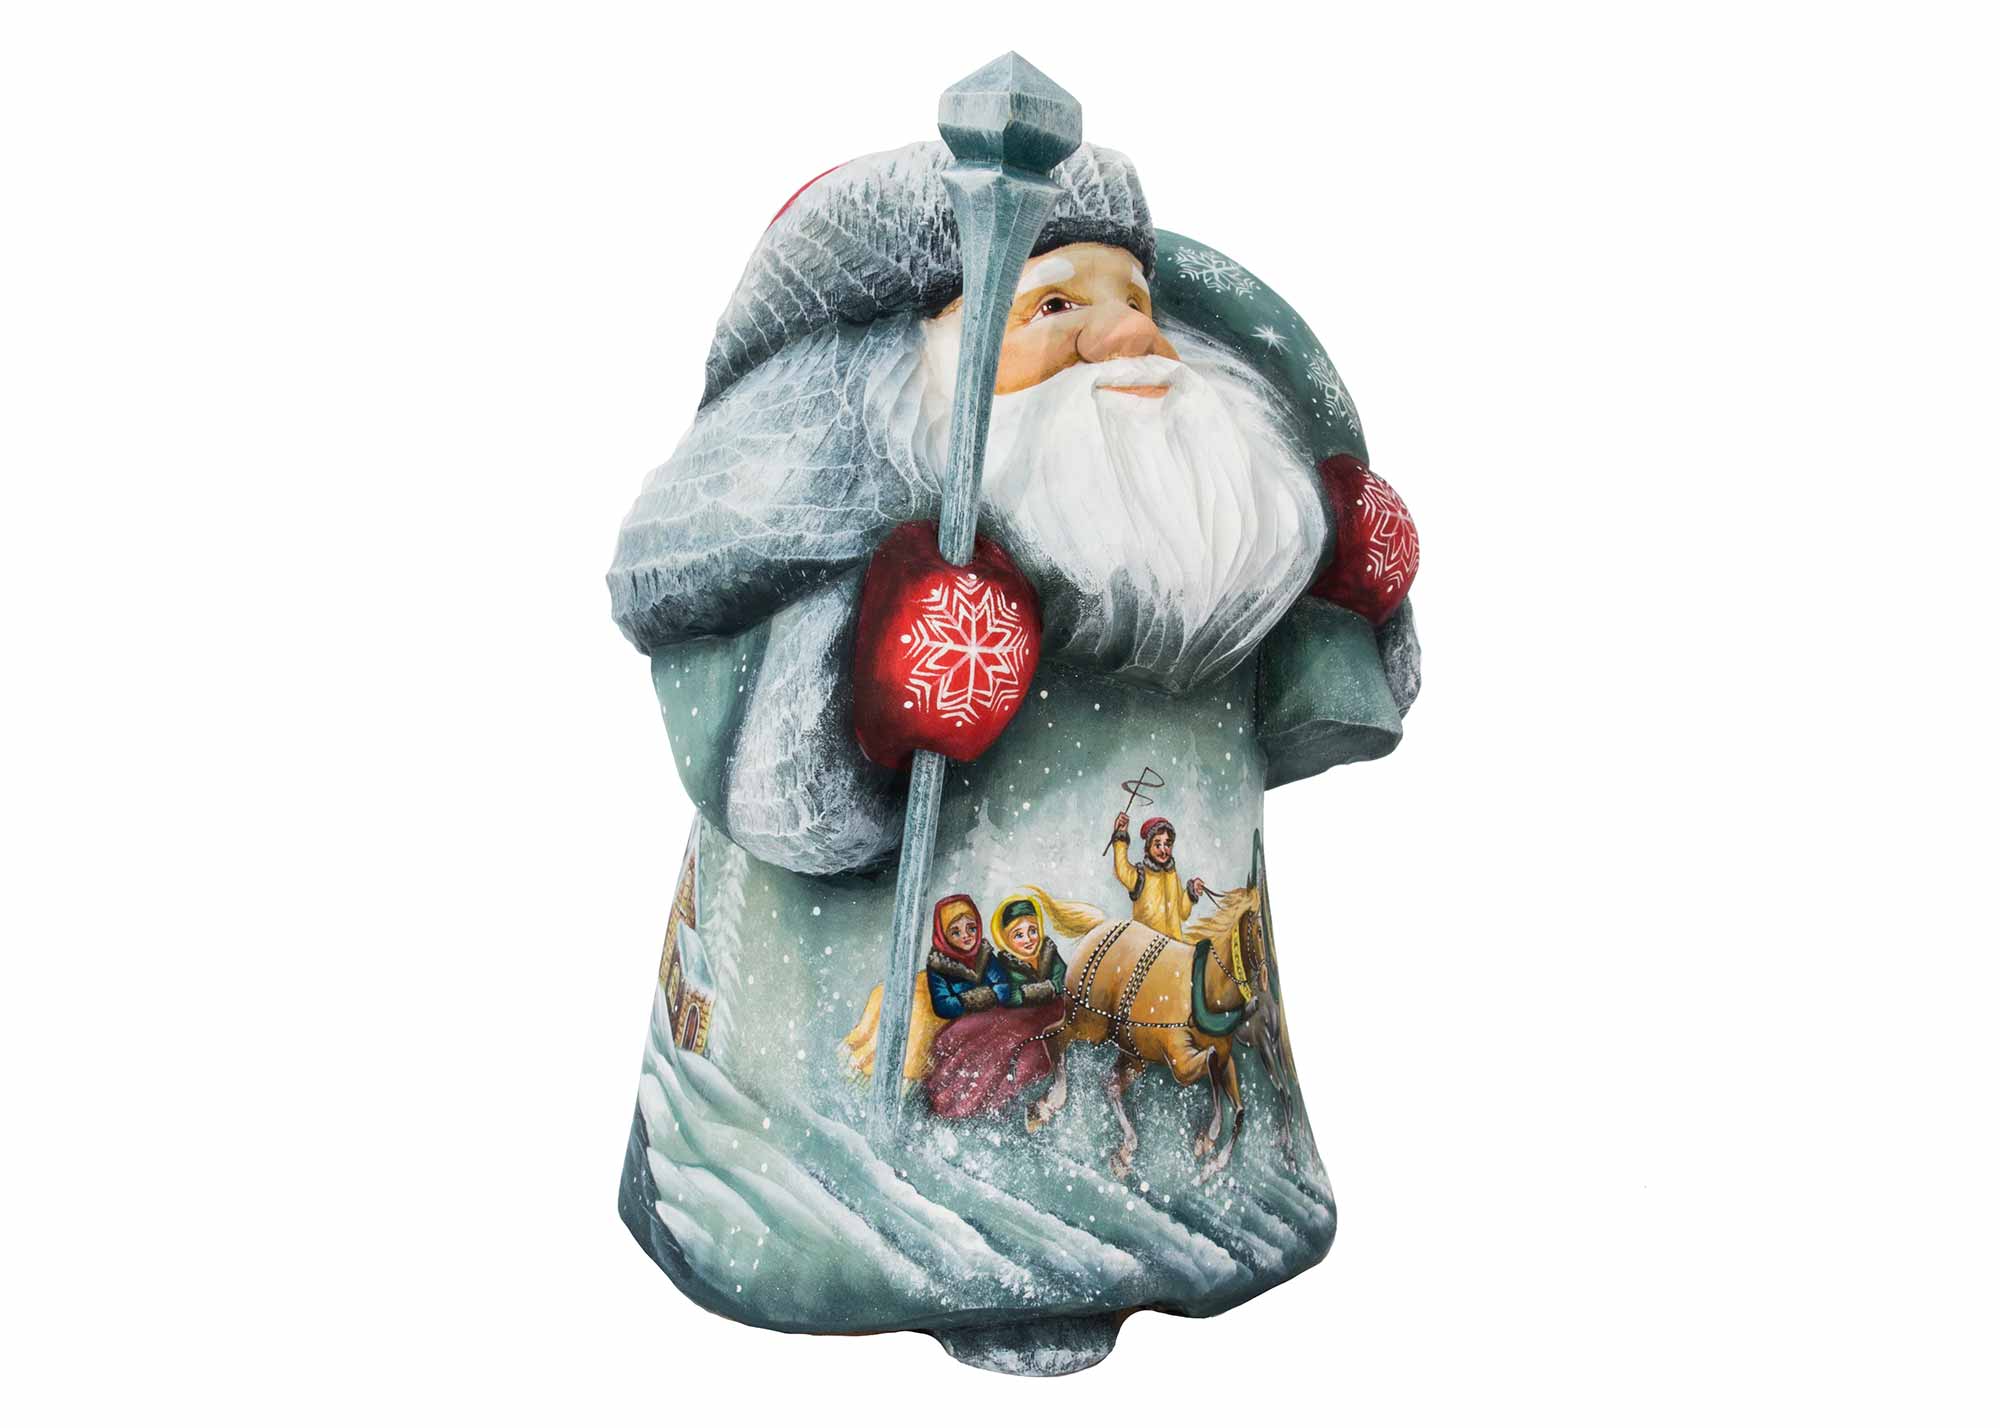 Buy Scenic Troika Father Frost Carving 6” at GoldenCockerel.com